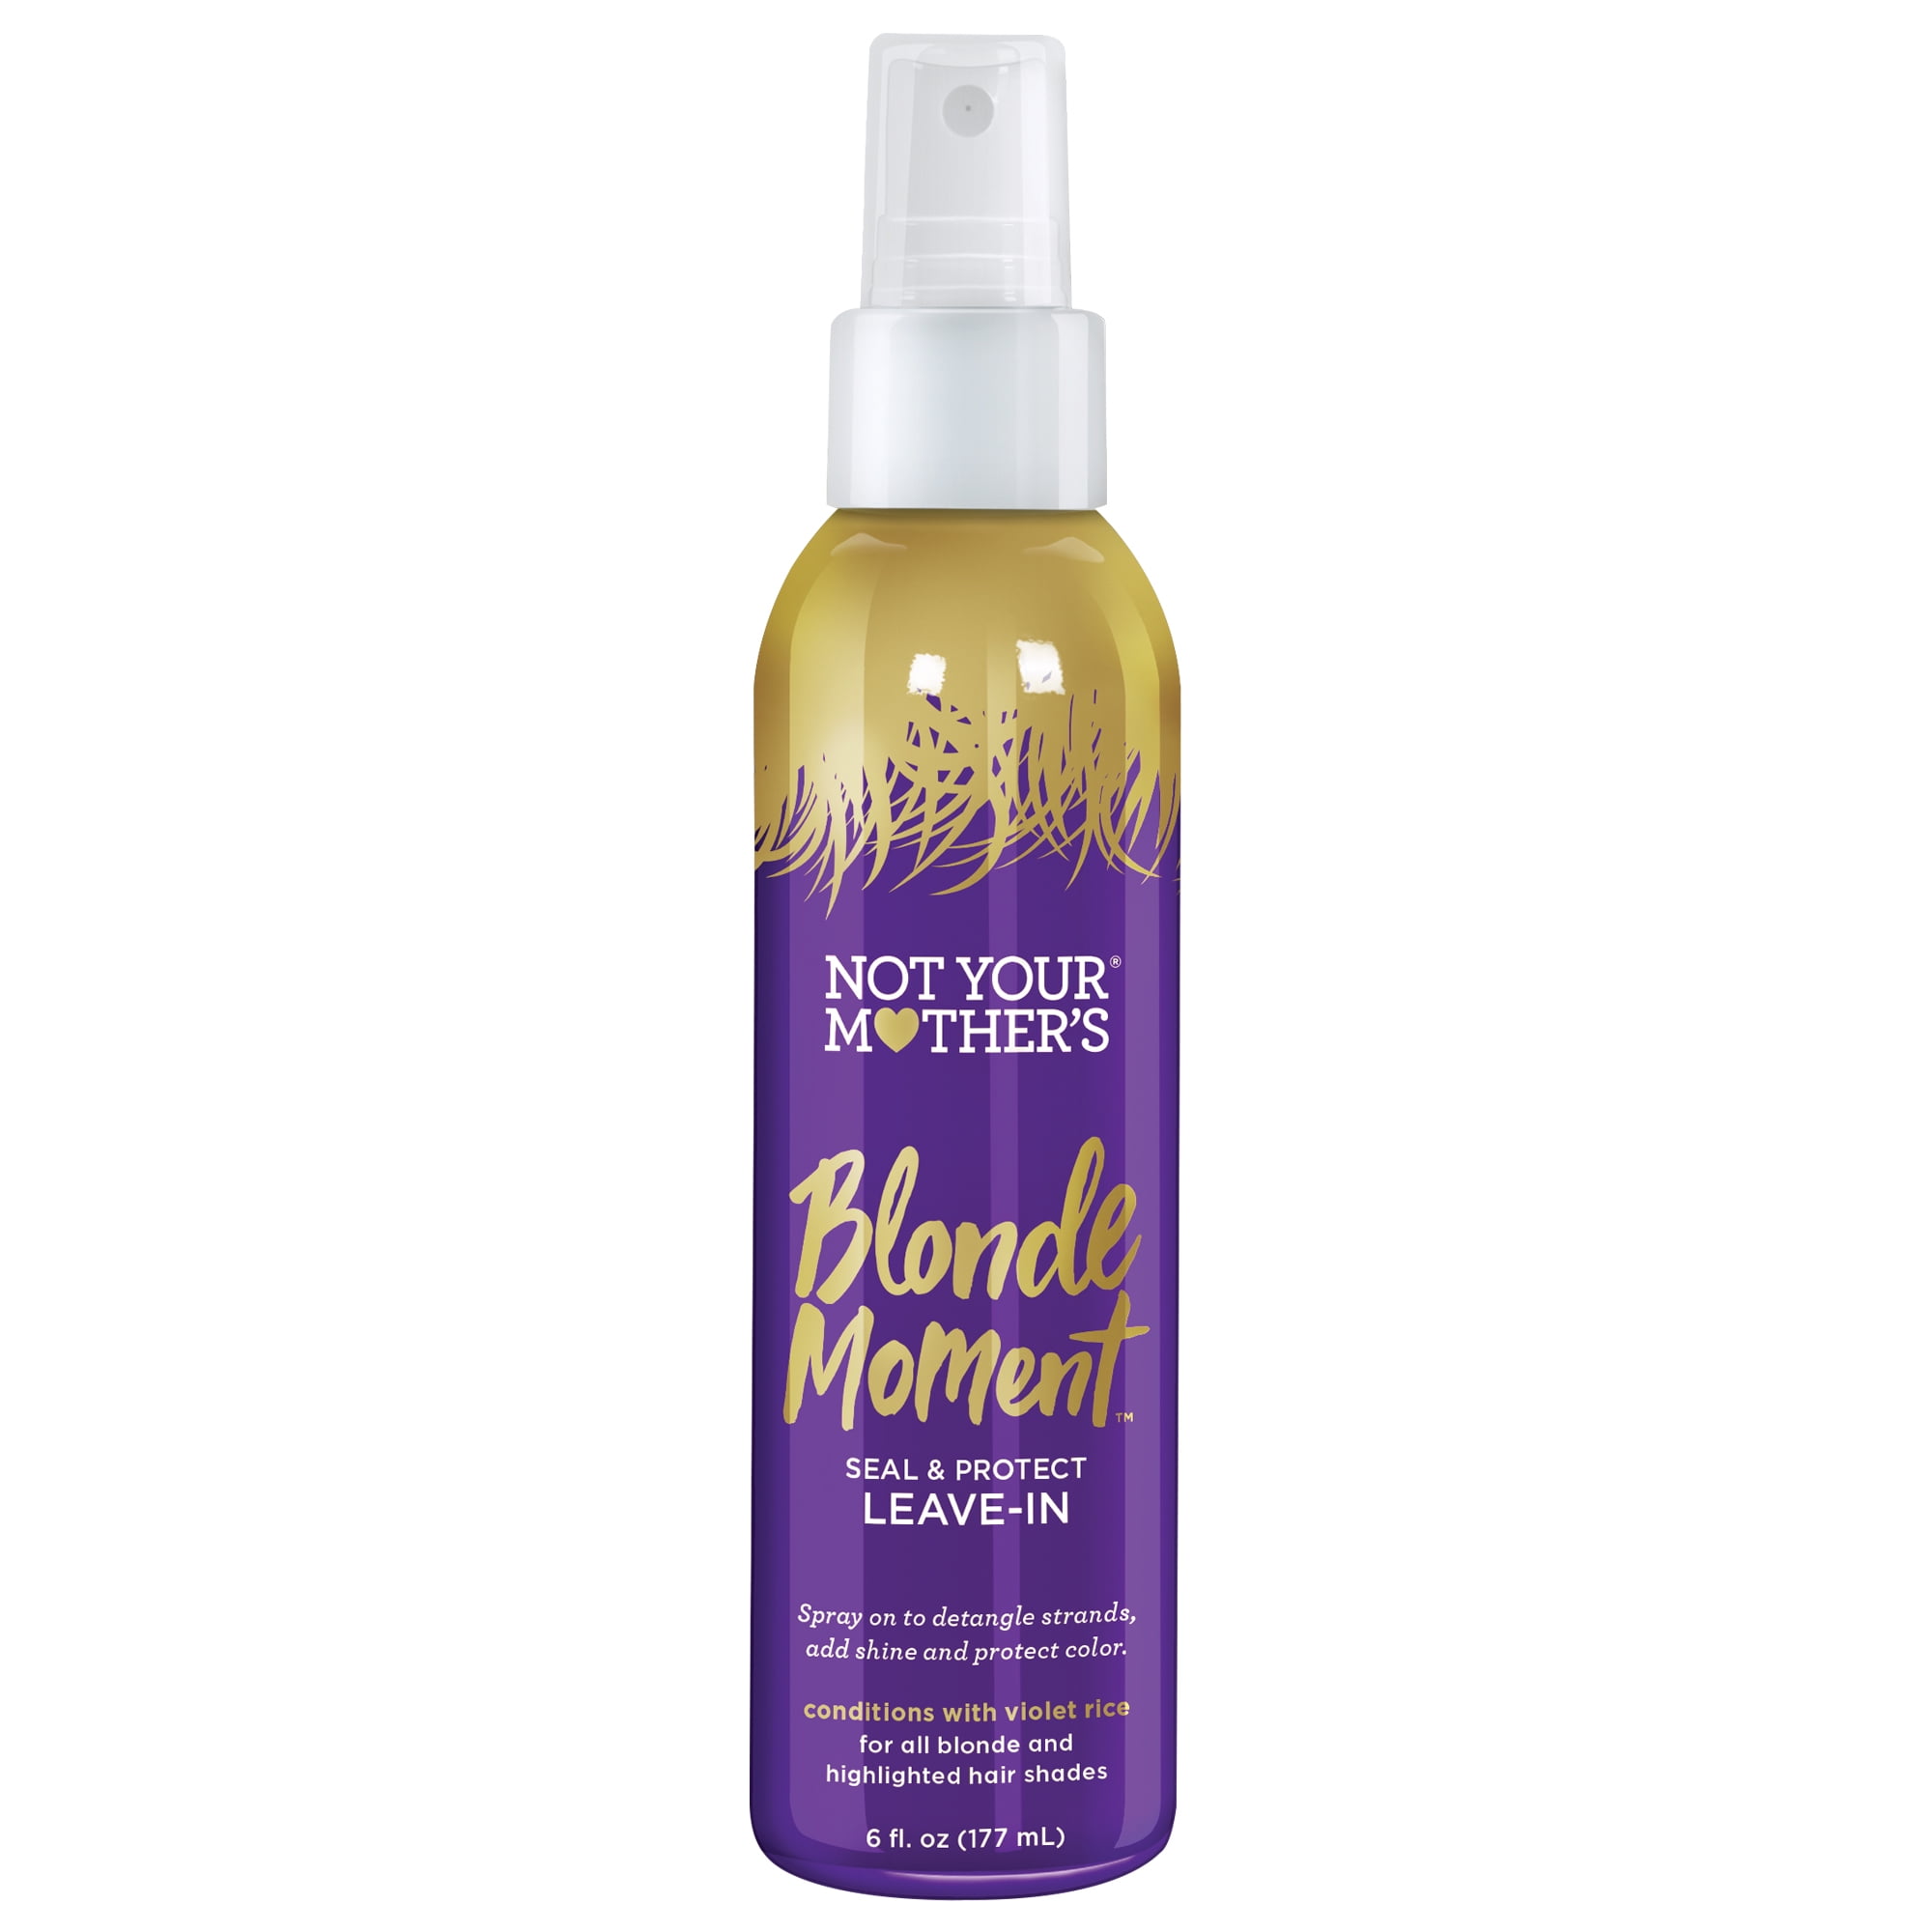 Not Your Mother's Blonde Moment Seal & Protect Leave-In Conditioner, 6 oz